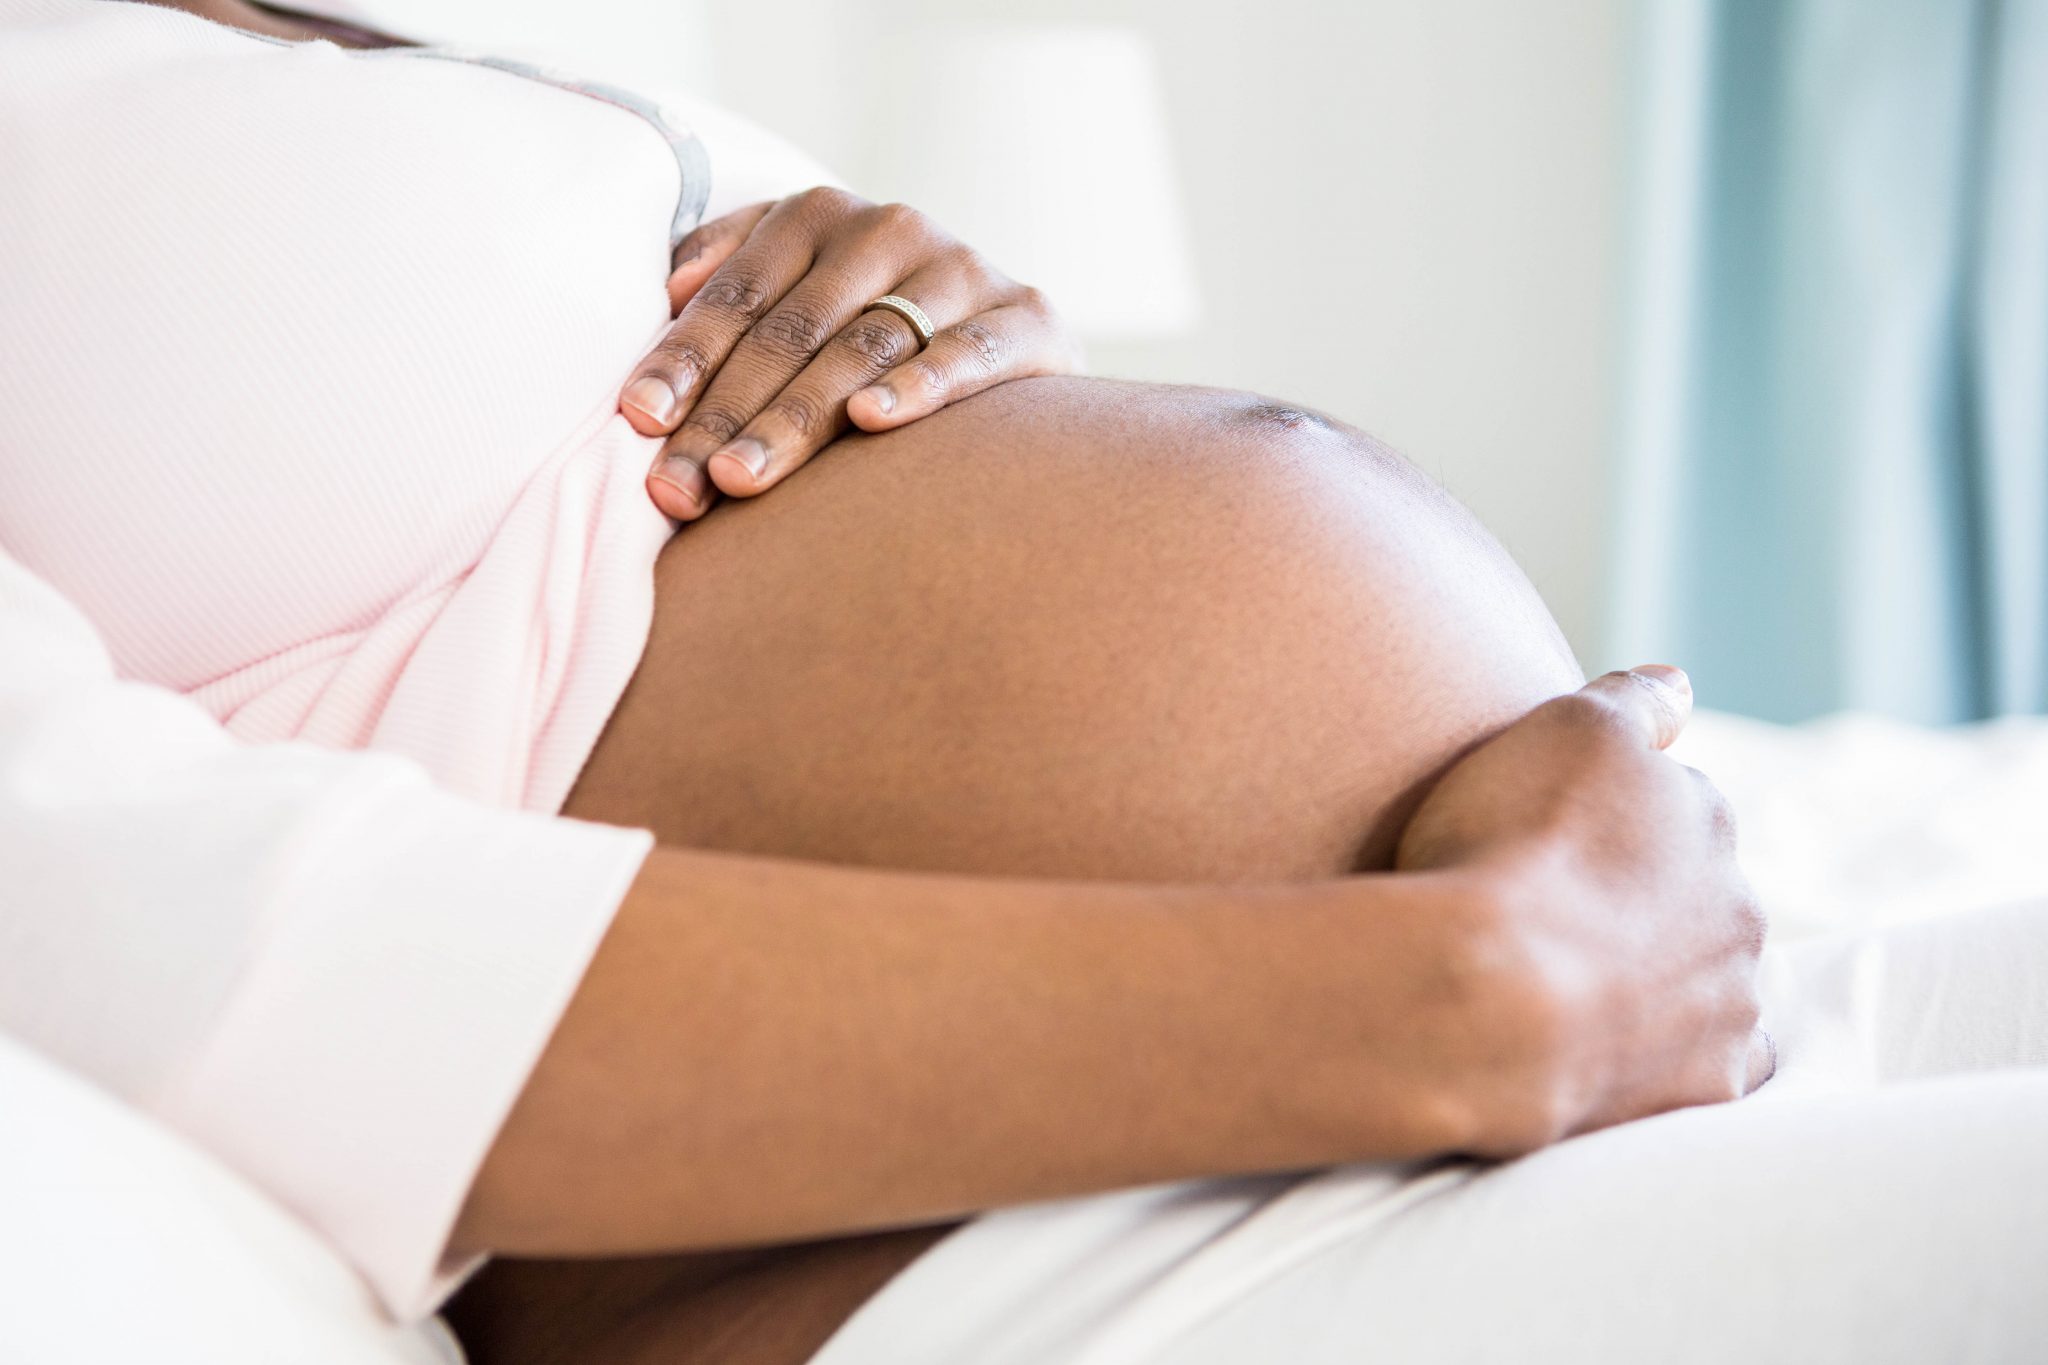 Recent Settlement Emphasizes Urgency for a Federal Pregnant Workers